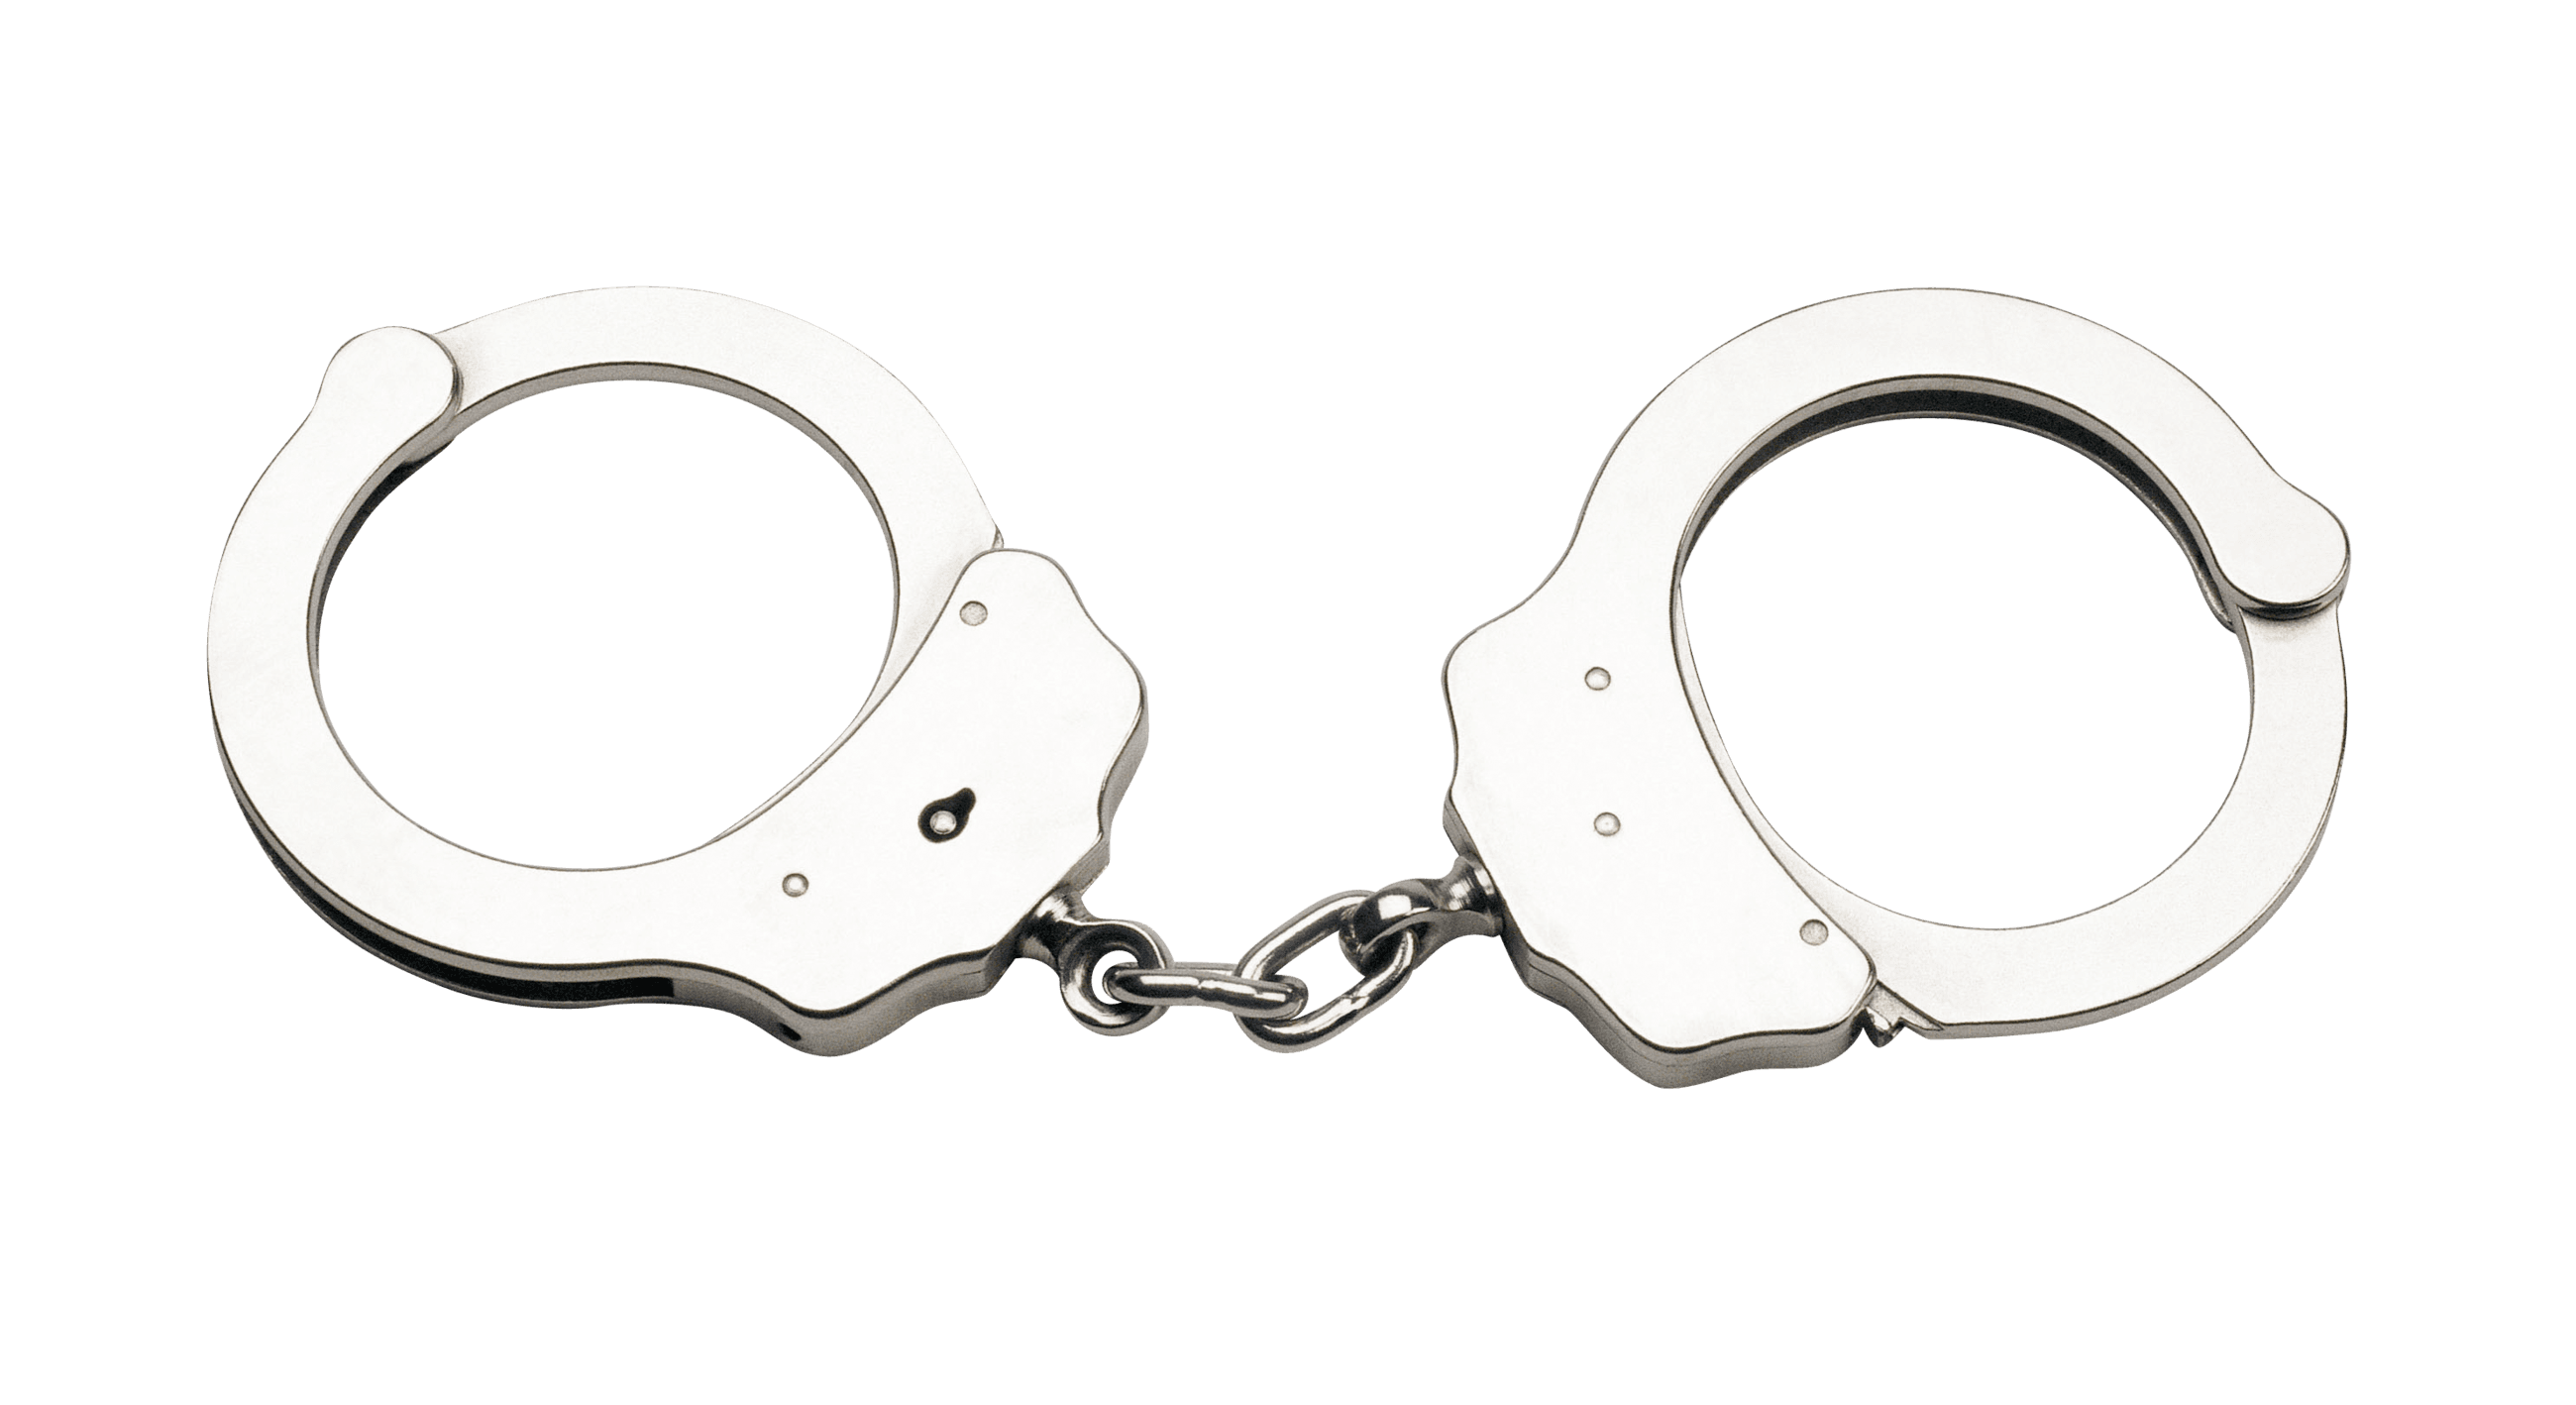 Handcuff clipart jail, Handcuff jail Transparent FREE for